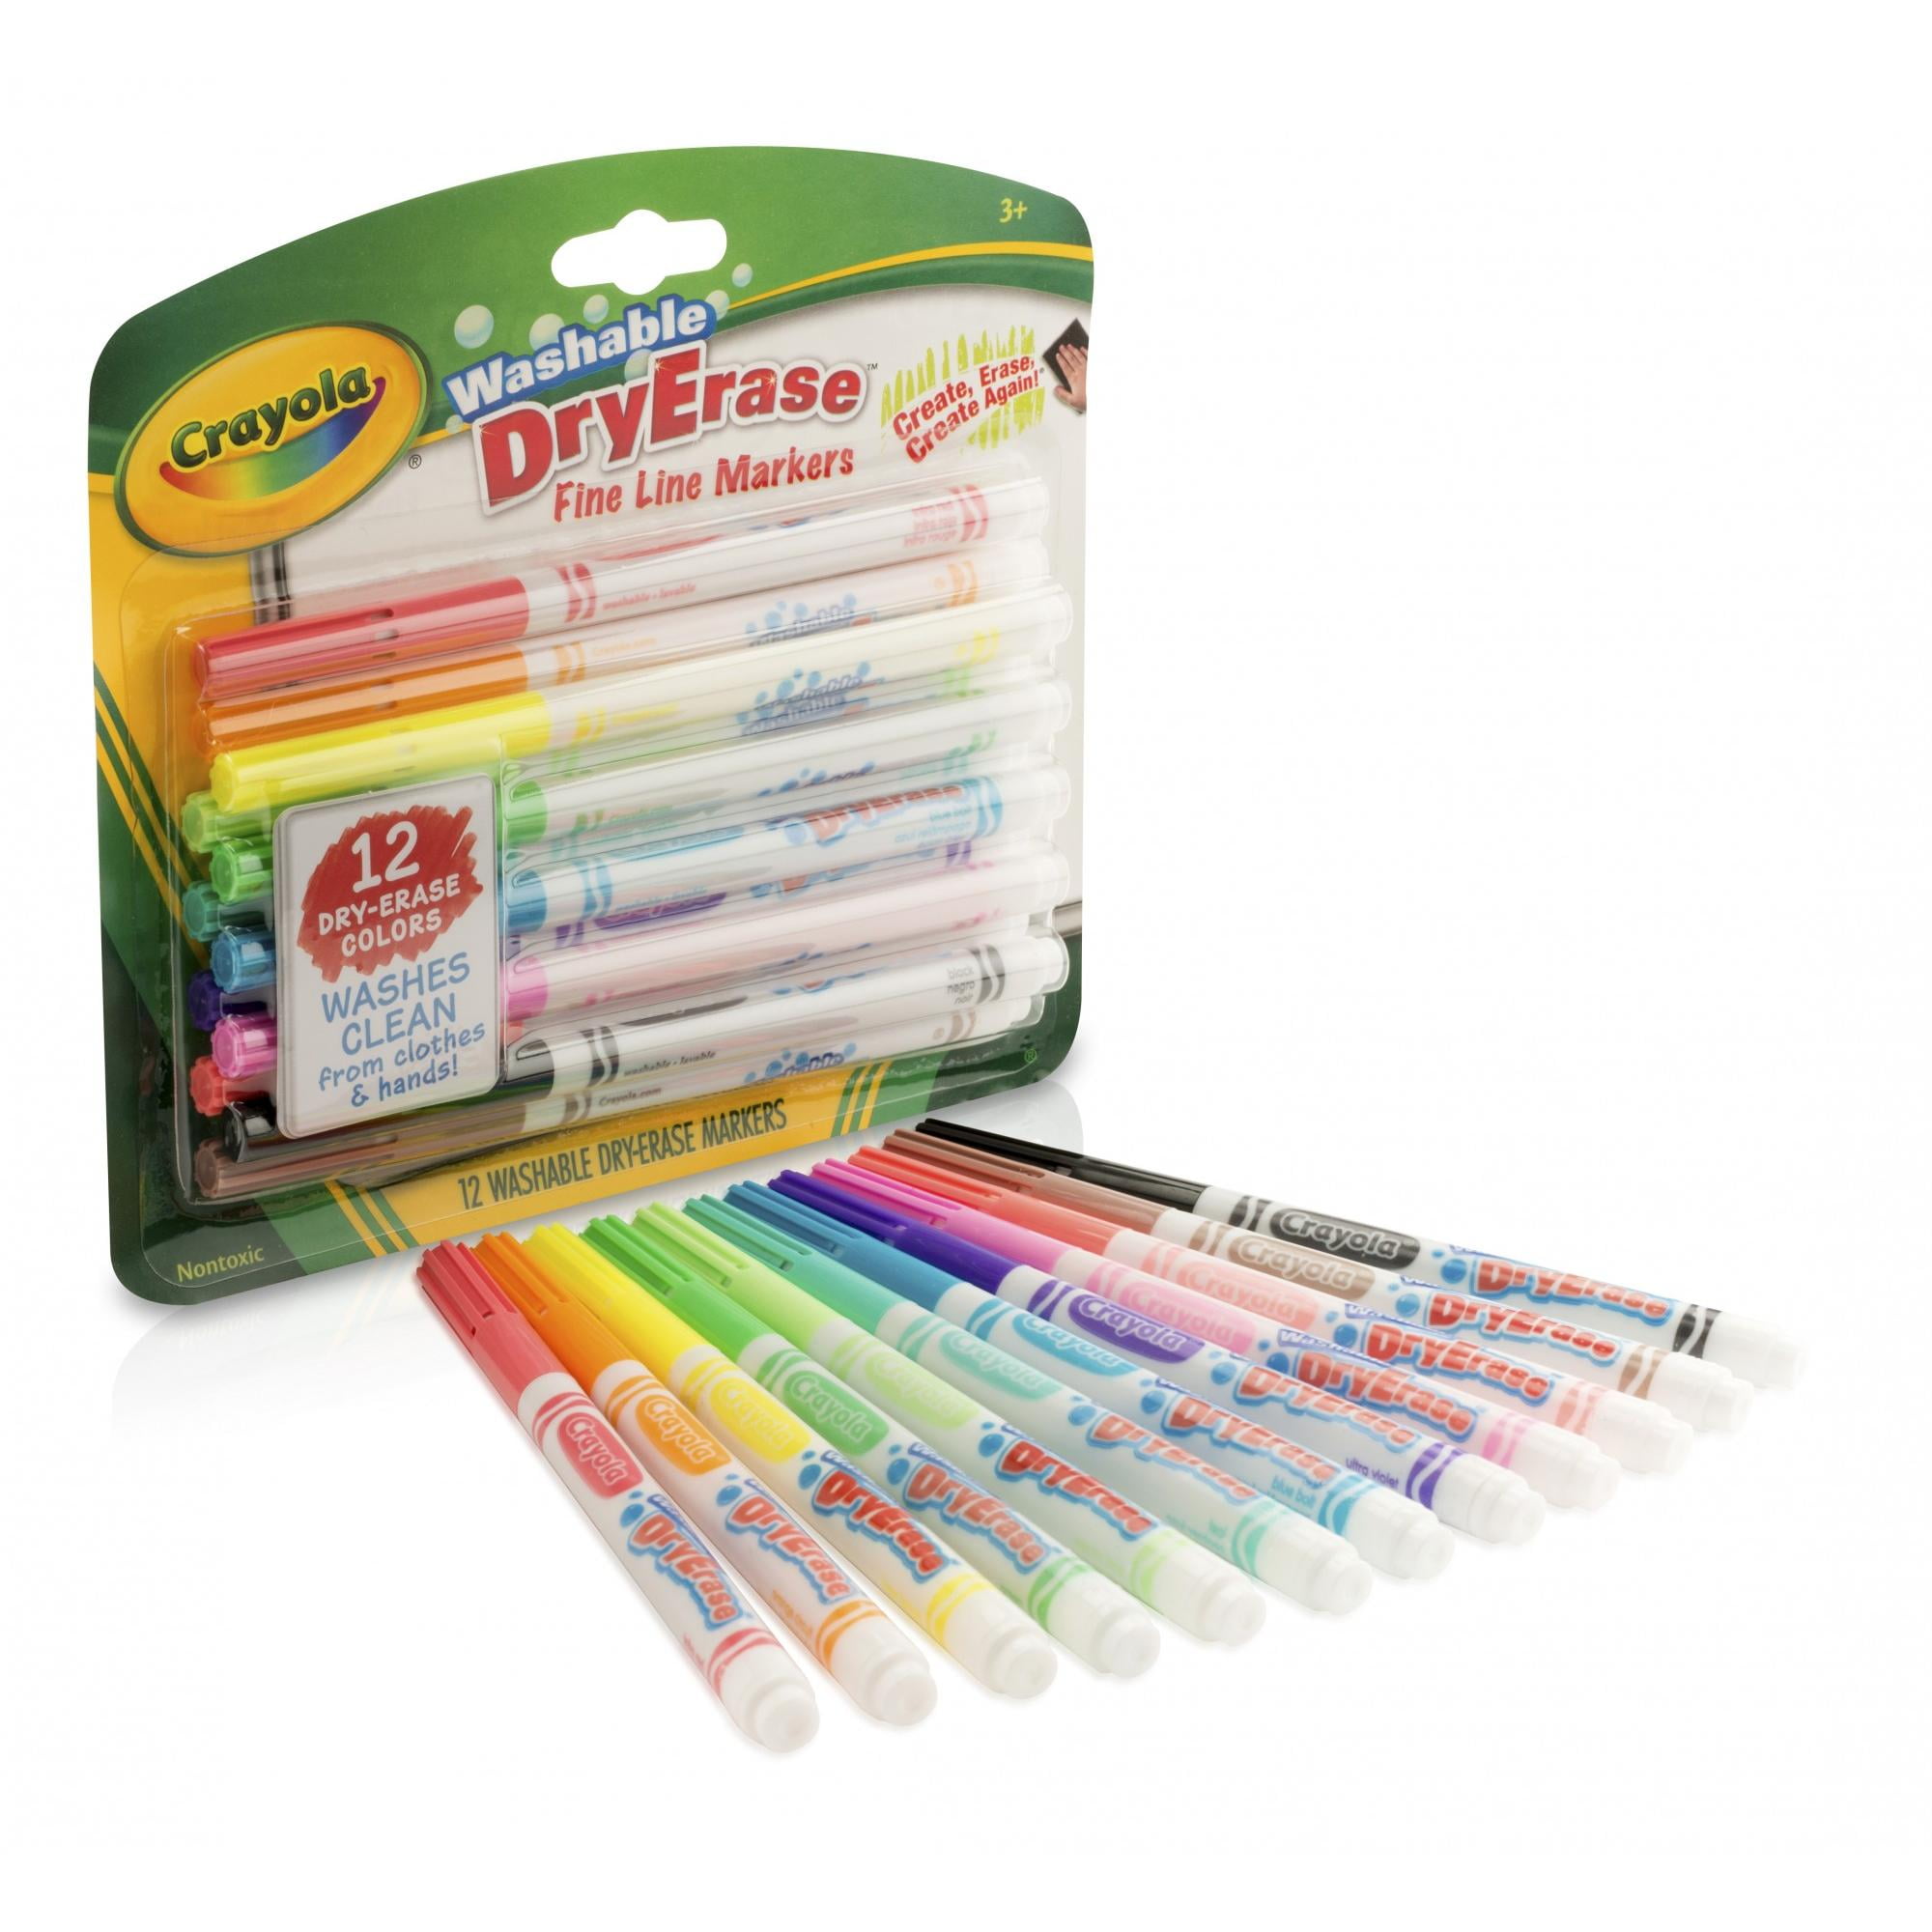 Up To 19% Off on Crayola Dry-Erase Markers